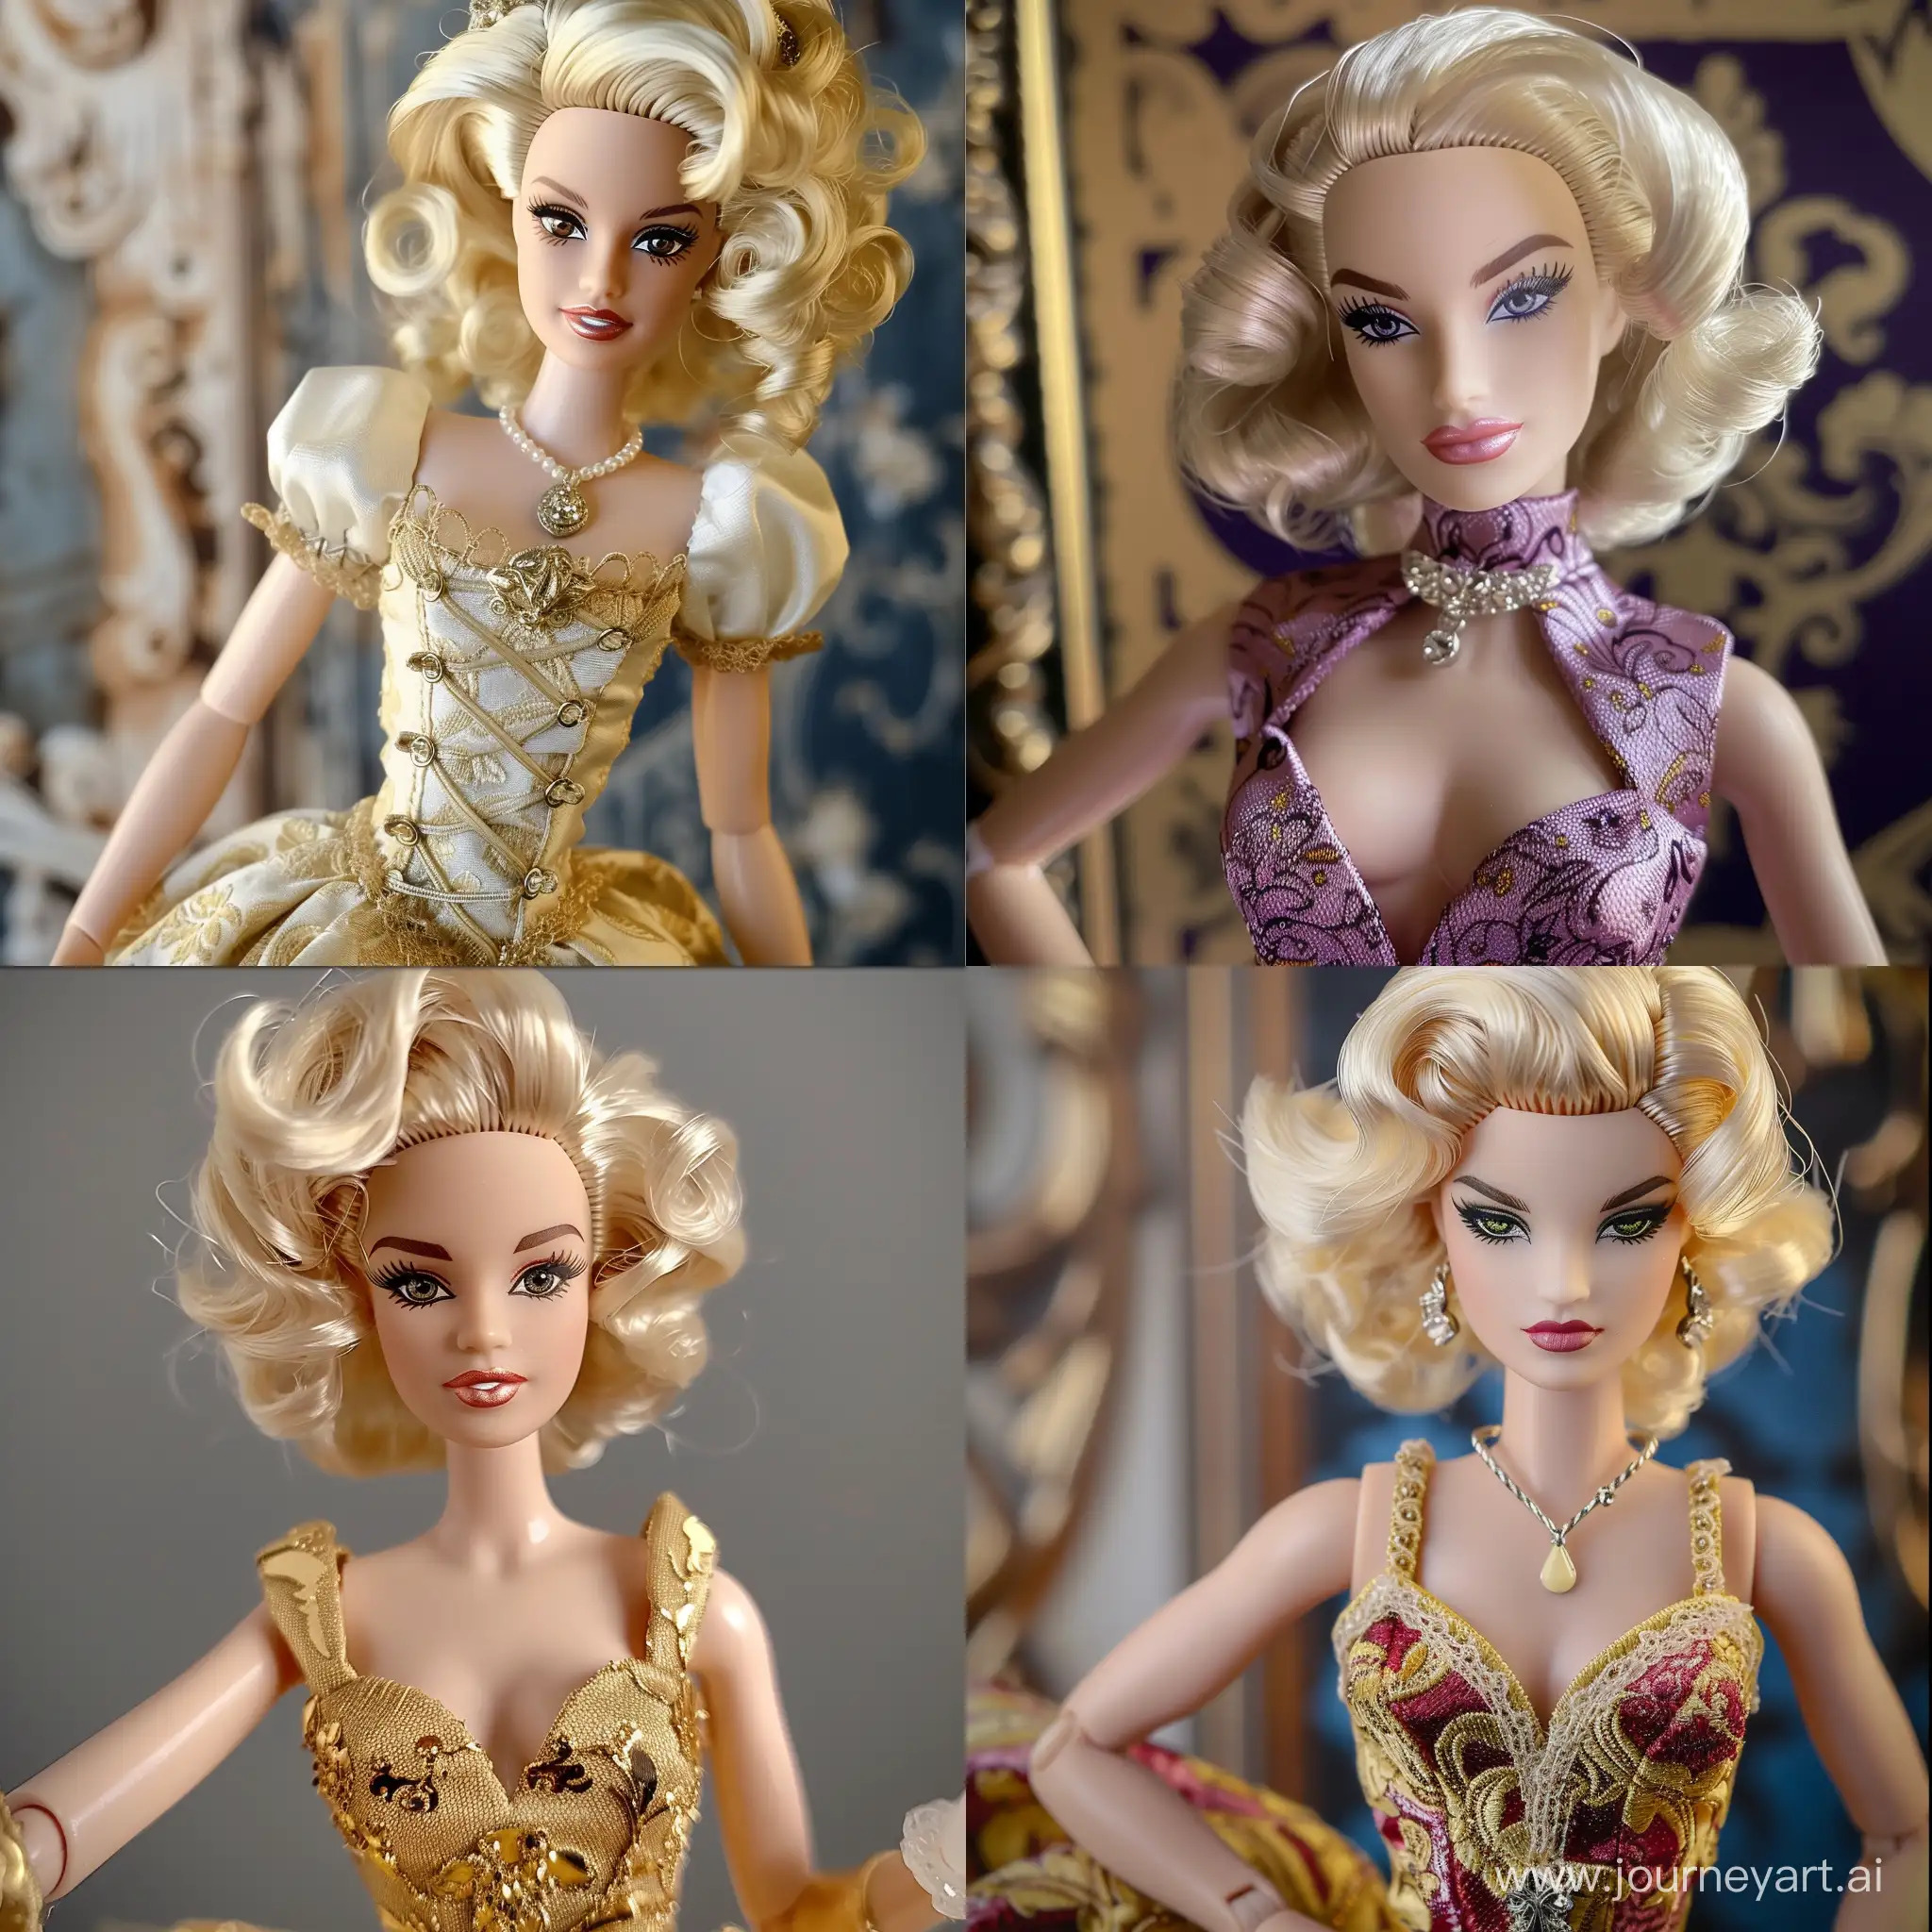 Marilyn Monroe as Ever After High Doll, concept, Ever After High Doll, realistic, Mattel style, Doll Effect, retro, vintage, glamour, Princess dress, detailed